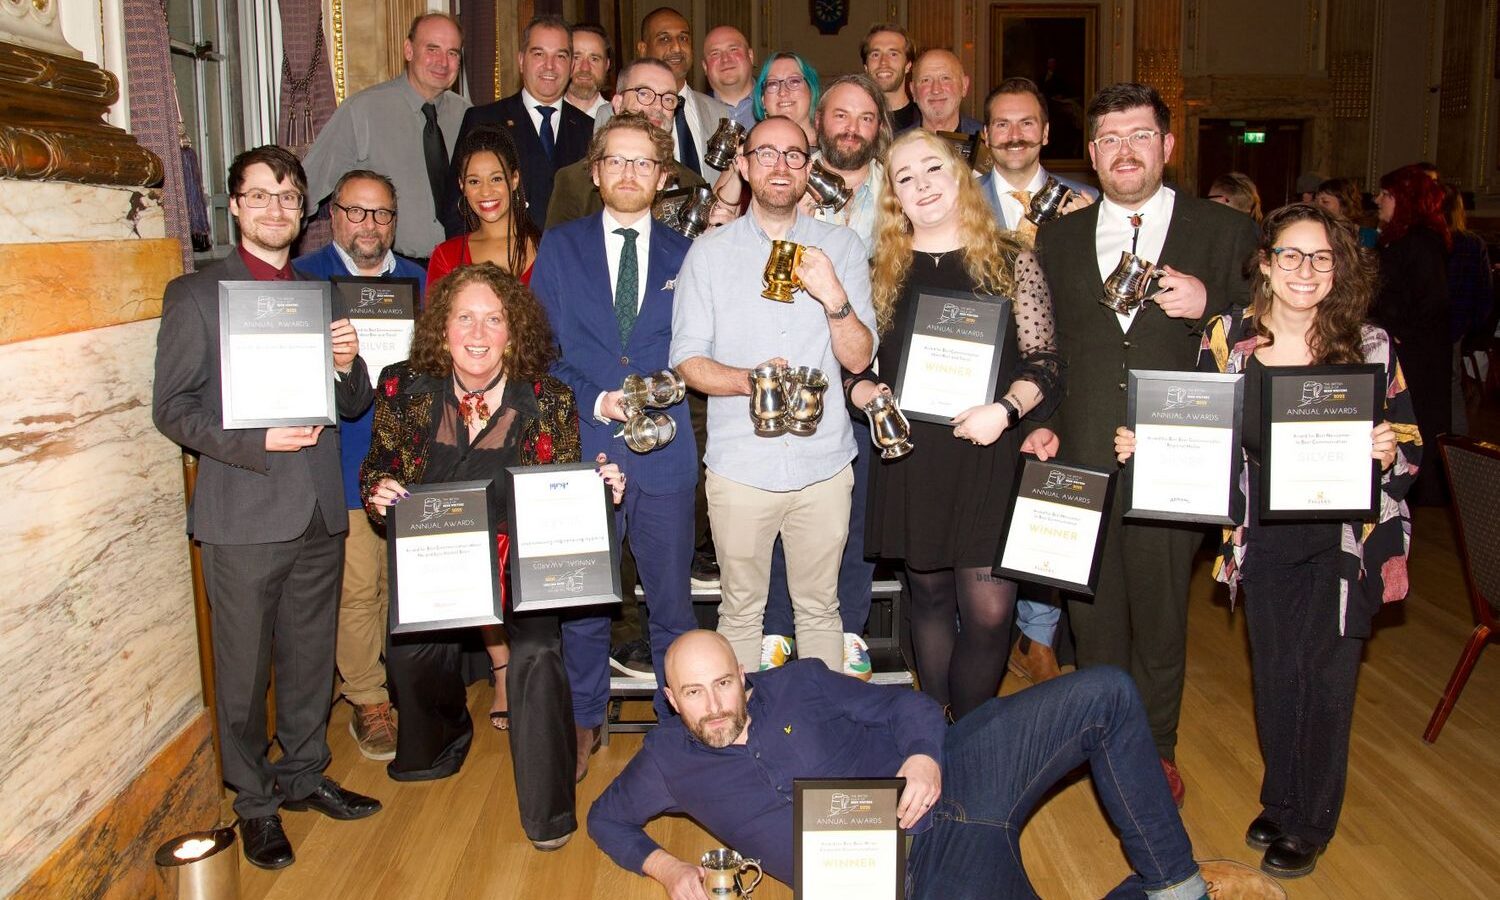 Group photo of the winners at the 2022 British Guild of Beer Writers Awards